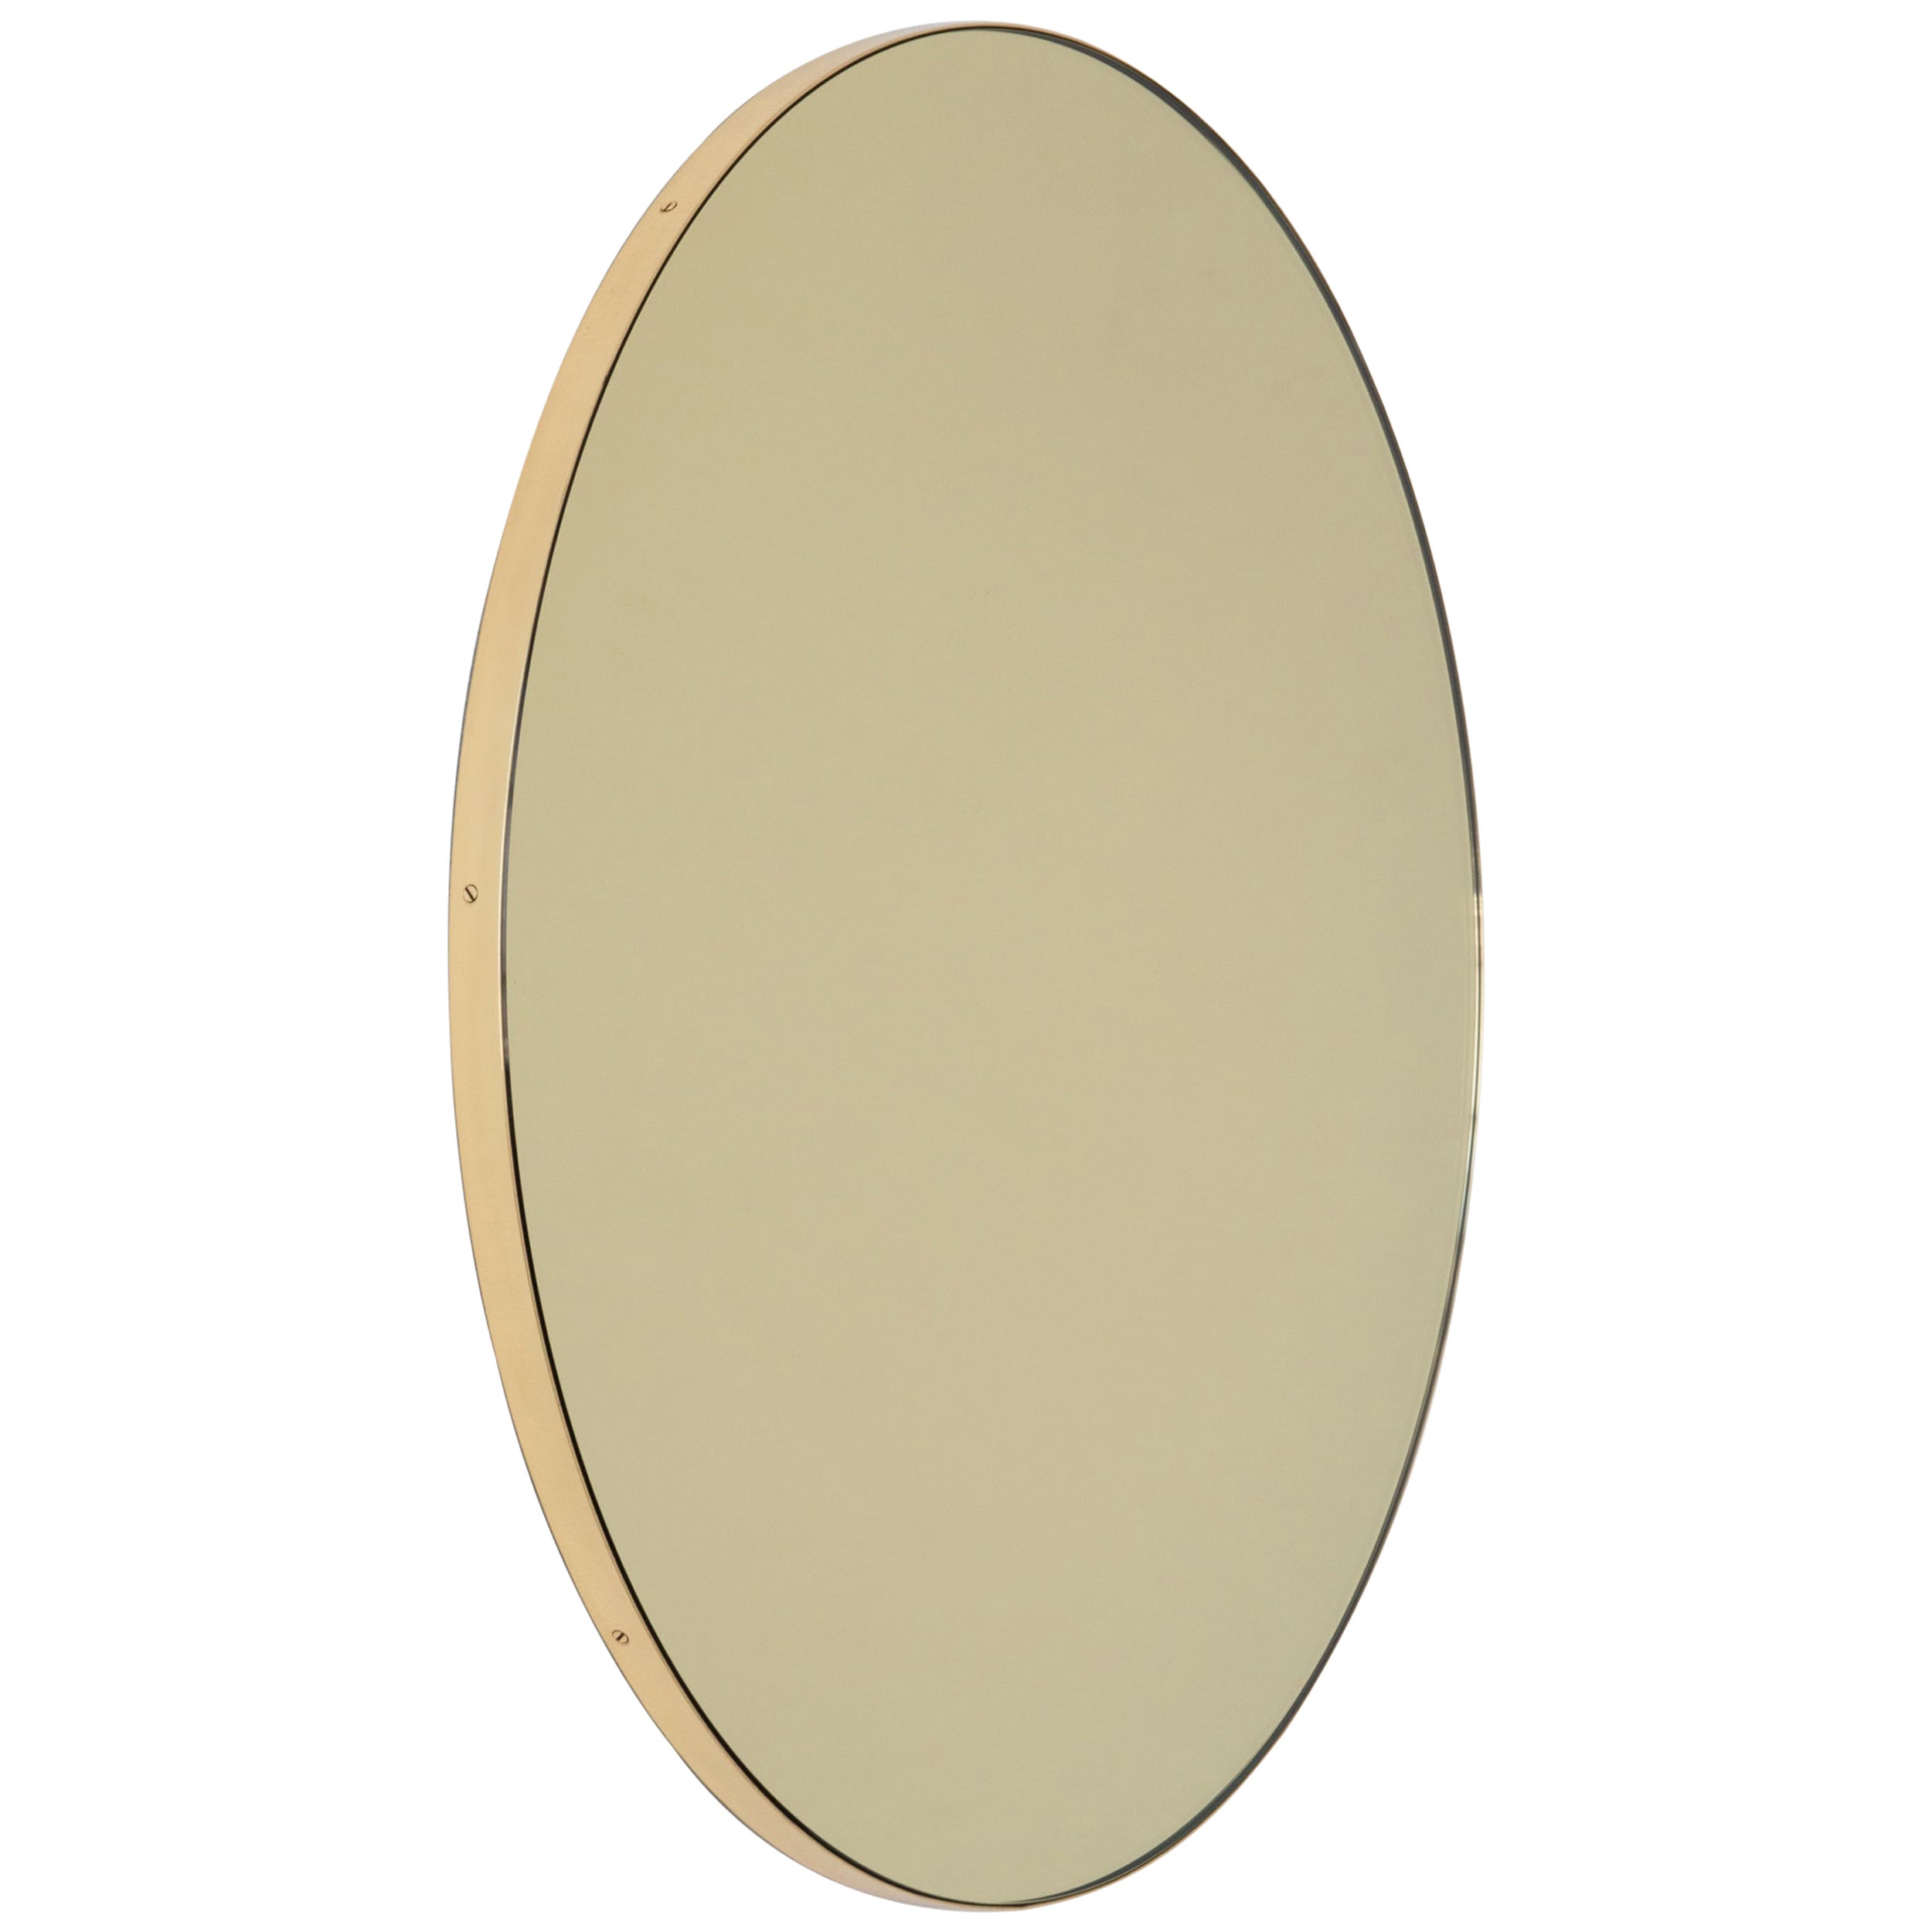 In Stock Orbis Gold Tinted Round Contemporary Mirror, Brass Frame, Medium For Sale